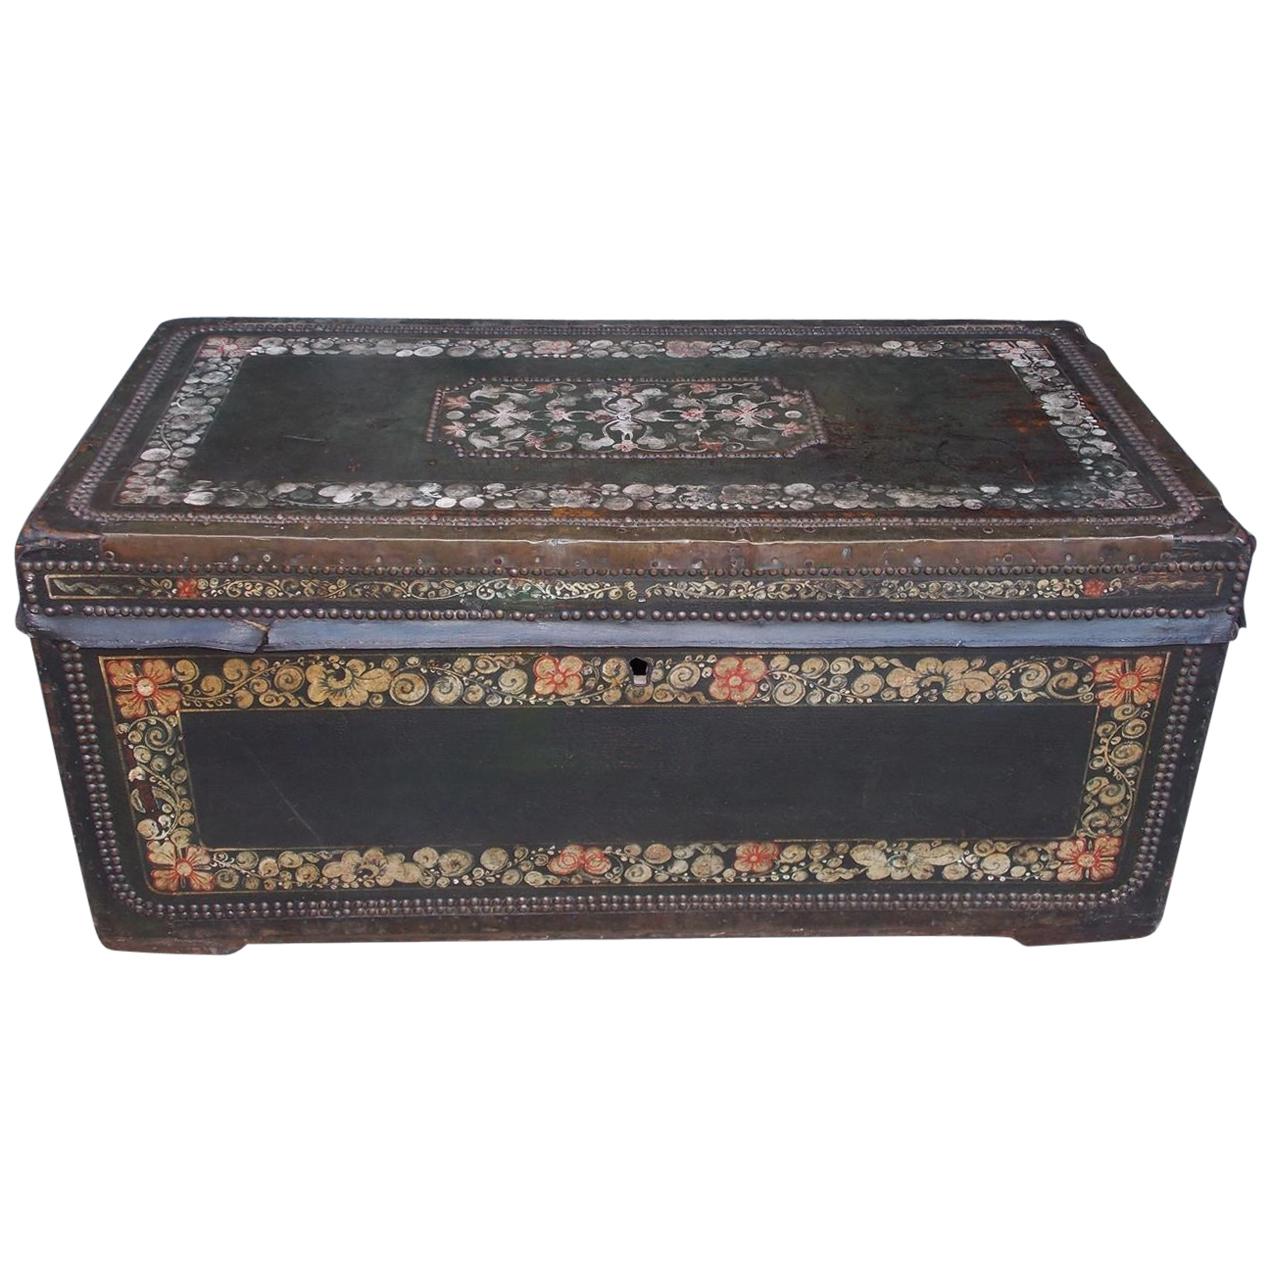 Chinese Export Leather Clad Polychrome and Painted Camphor Wood Trunk. C. 1820